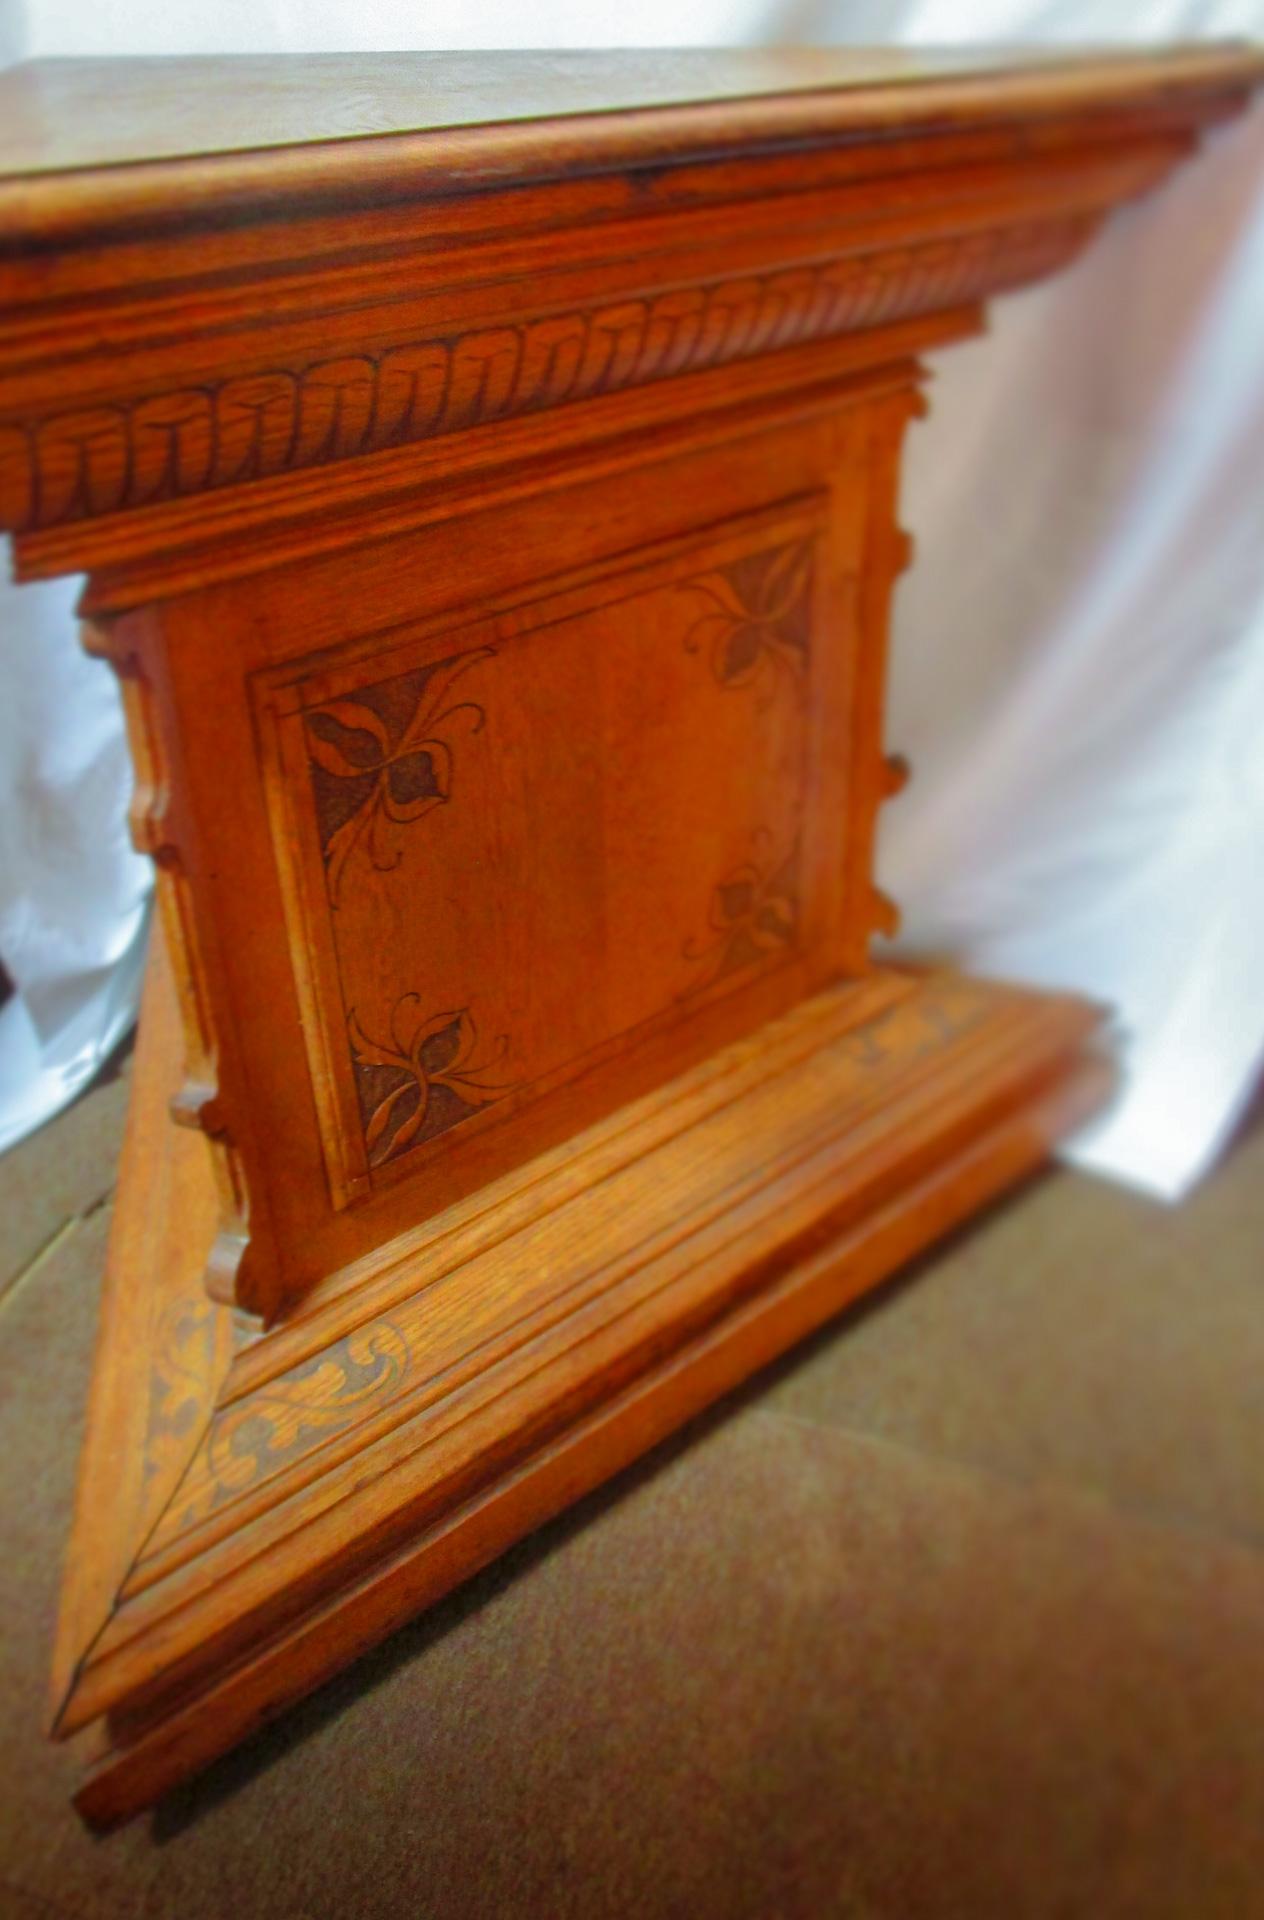 Part of the Masonic emblem is the triangle shape compass which represents the measurement of the ability to undertake actions within certain constraints. This very unusual solid golden oak tri-corner Masonic Lodge table/altar is intricately carved